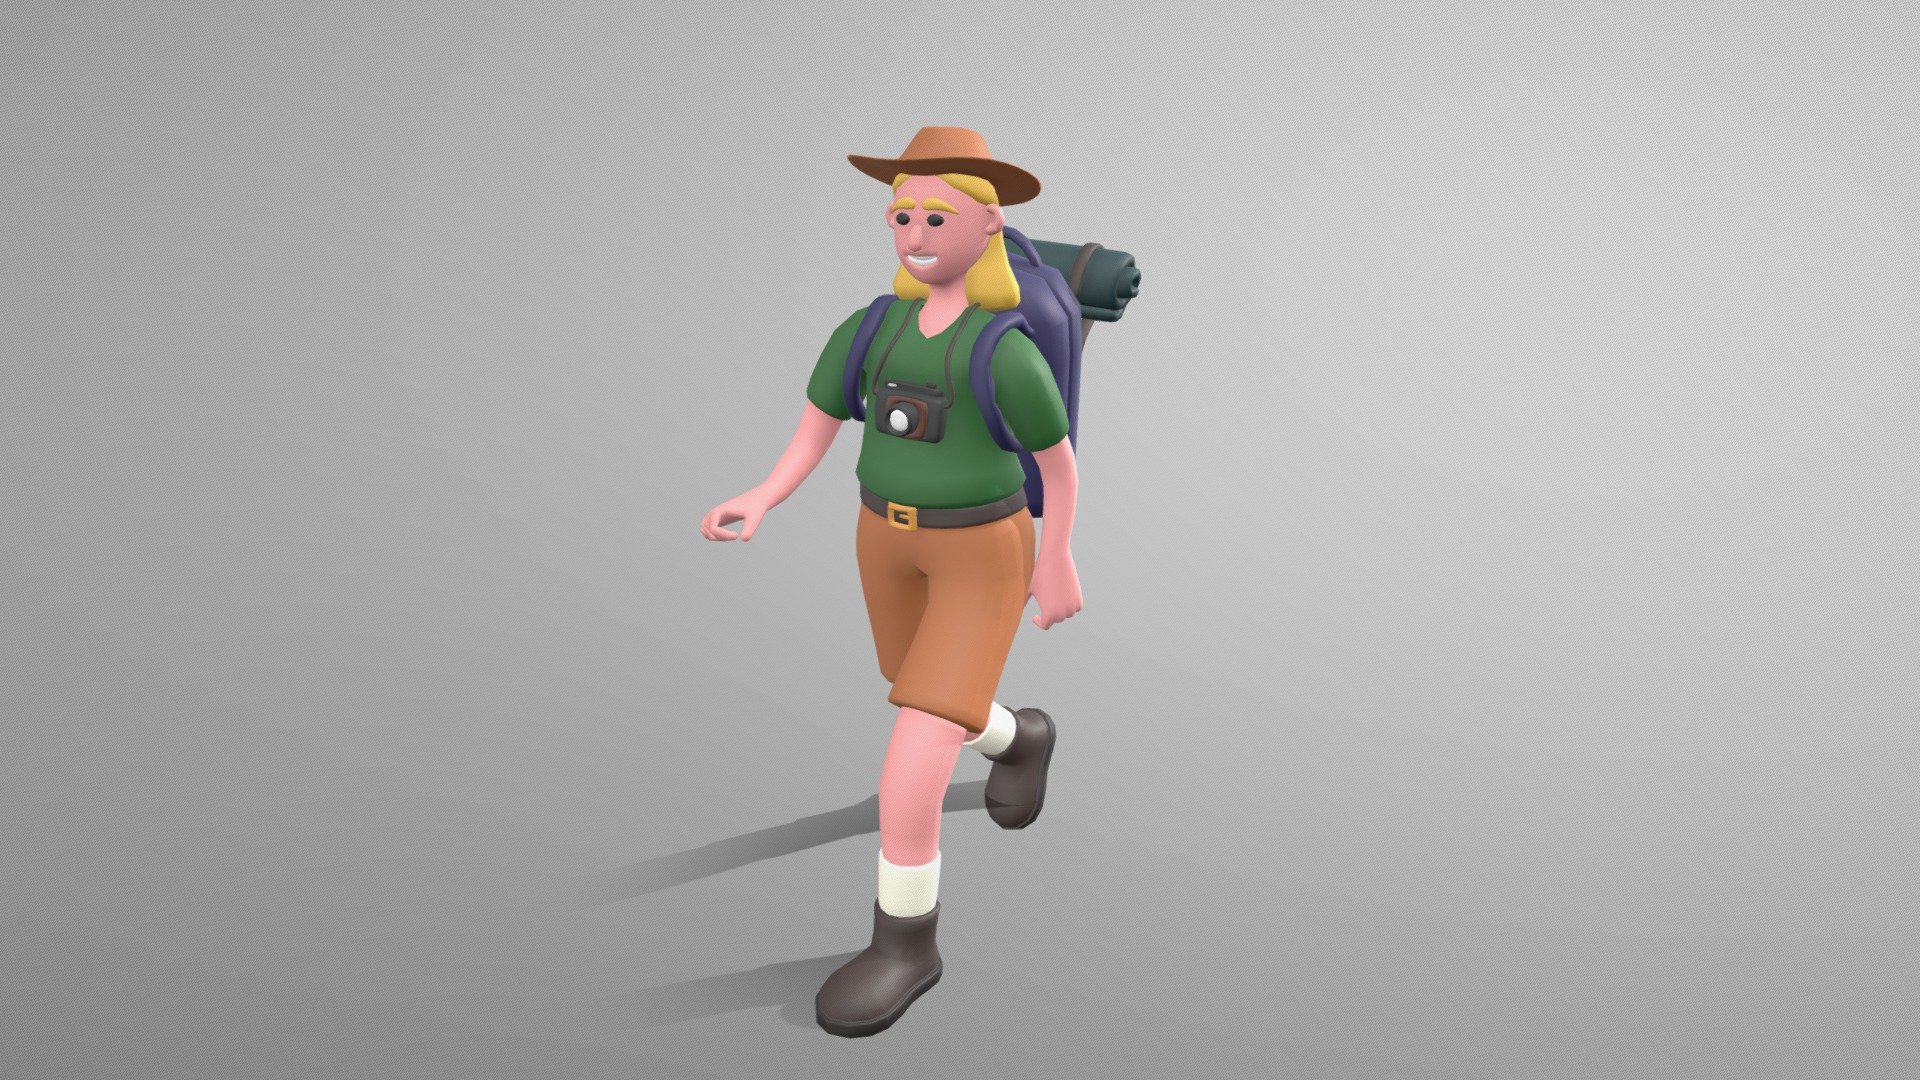 Stylized Girl Tourist is the part of the big characters bundle. These stylized 3D characters might be useful for motion graphics design, cartoon production, game development, illustrations and many other industries.

The 3D model is rigged and ready to use with Mixamo. You can apply any Mixamo animation in one click . We also added 12 widely used animations.

The character model is well optimized and subdivision ready. You can choose any smoothing option you want, according to your project.

The model has only a single texture. It is useful for mobile game development and it's easy to change colors of clothes, skin etc.

If you have any questions or suggestions on improving our product, feel free to send a message to mail@dreamlab.net.ua - Stylized Girl Tourist - Mixamo Rigged Character - Buy Royalty Free 3D model by Dream Lab (@dreamlabanim) 3d model